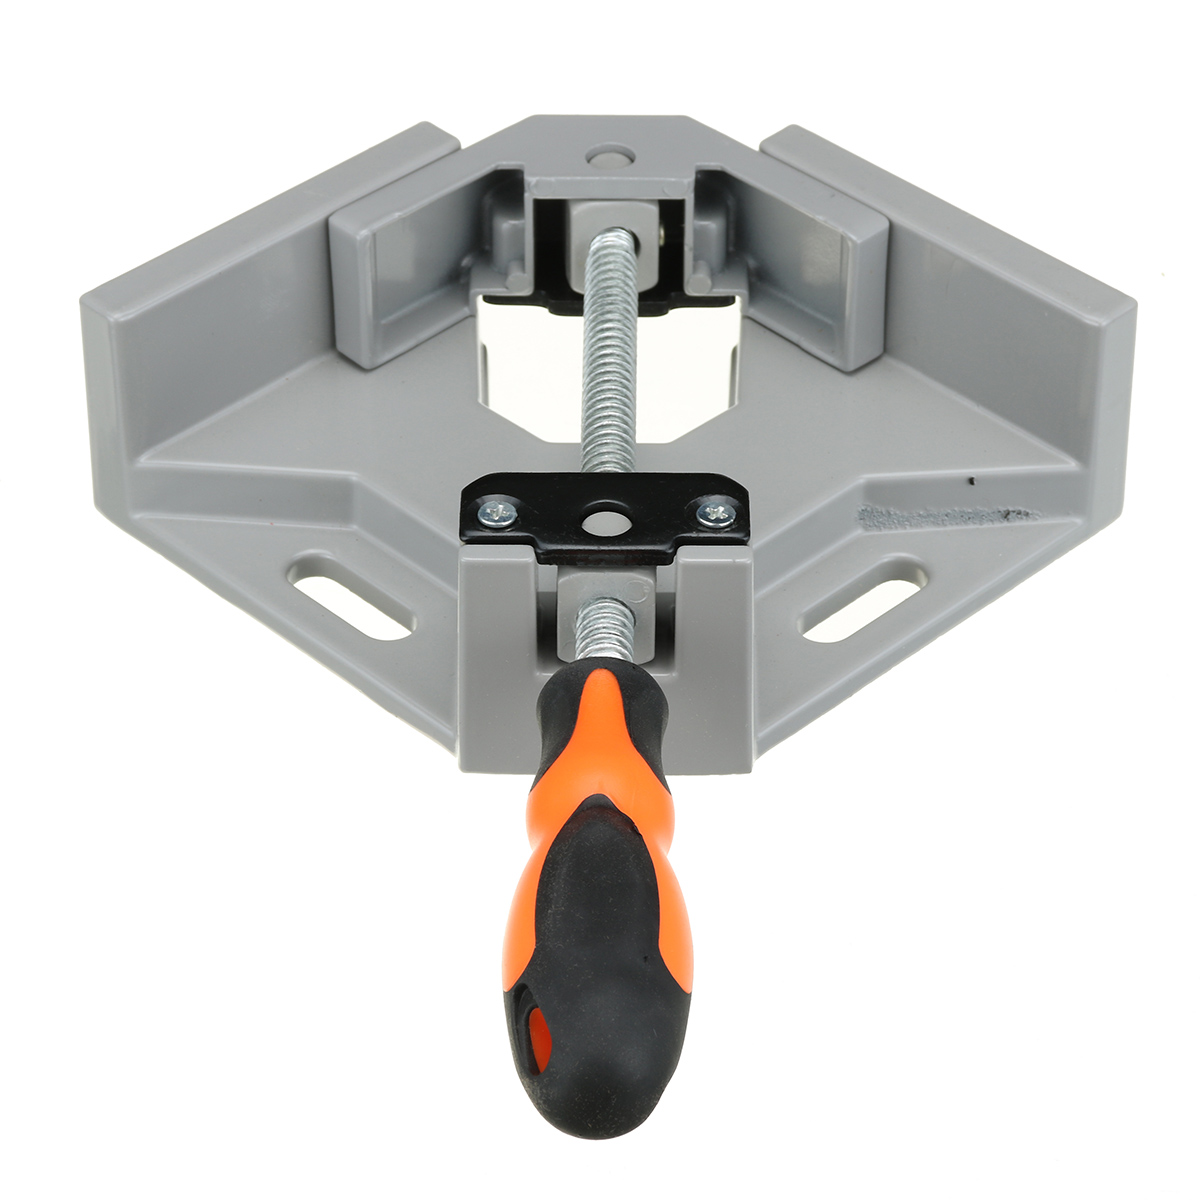 90-Degree-Quick-Release-Corner-Clamp-Right-Angle-Welding-Woodworking-Photo-Frame-Clamping-Tool-1768833-7